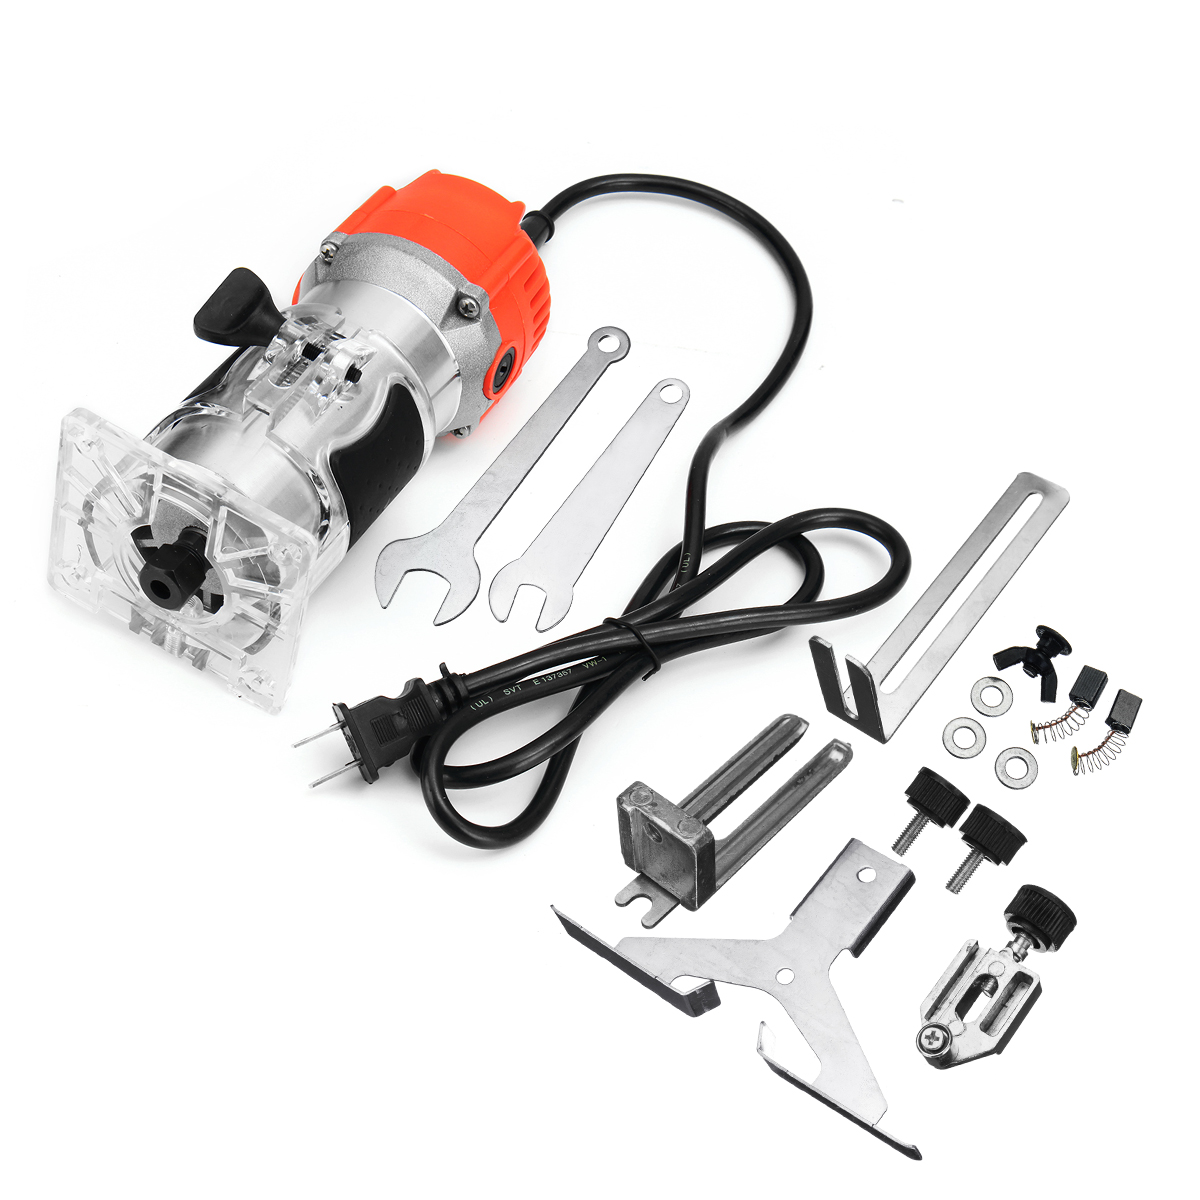 110V220V-680W-Trim-Router-Edge-Woodworking-Wood-Clean-Cuts-Power-Tool-Set-33000RPM-with-Box-1245528